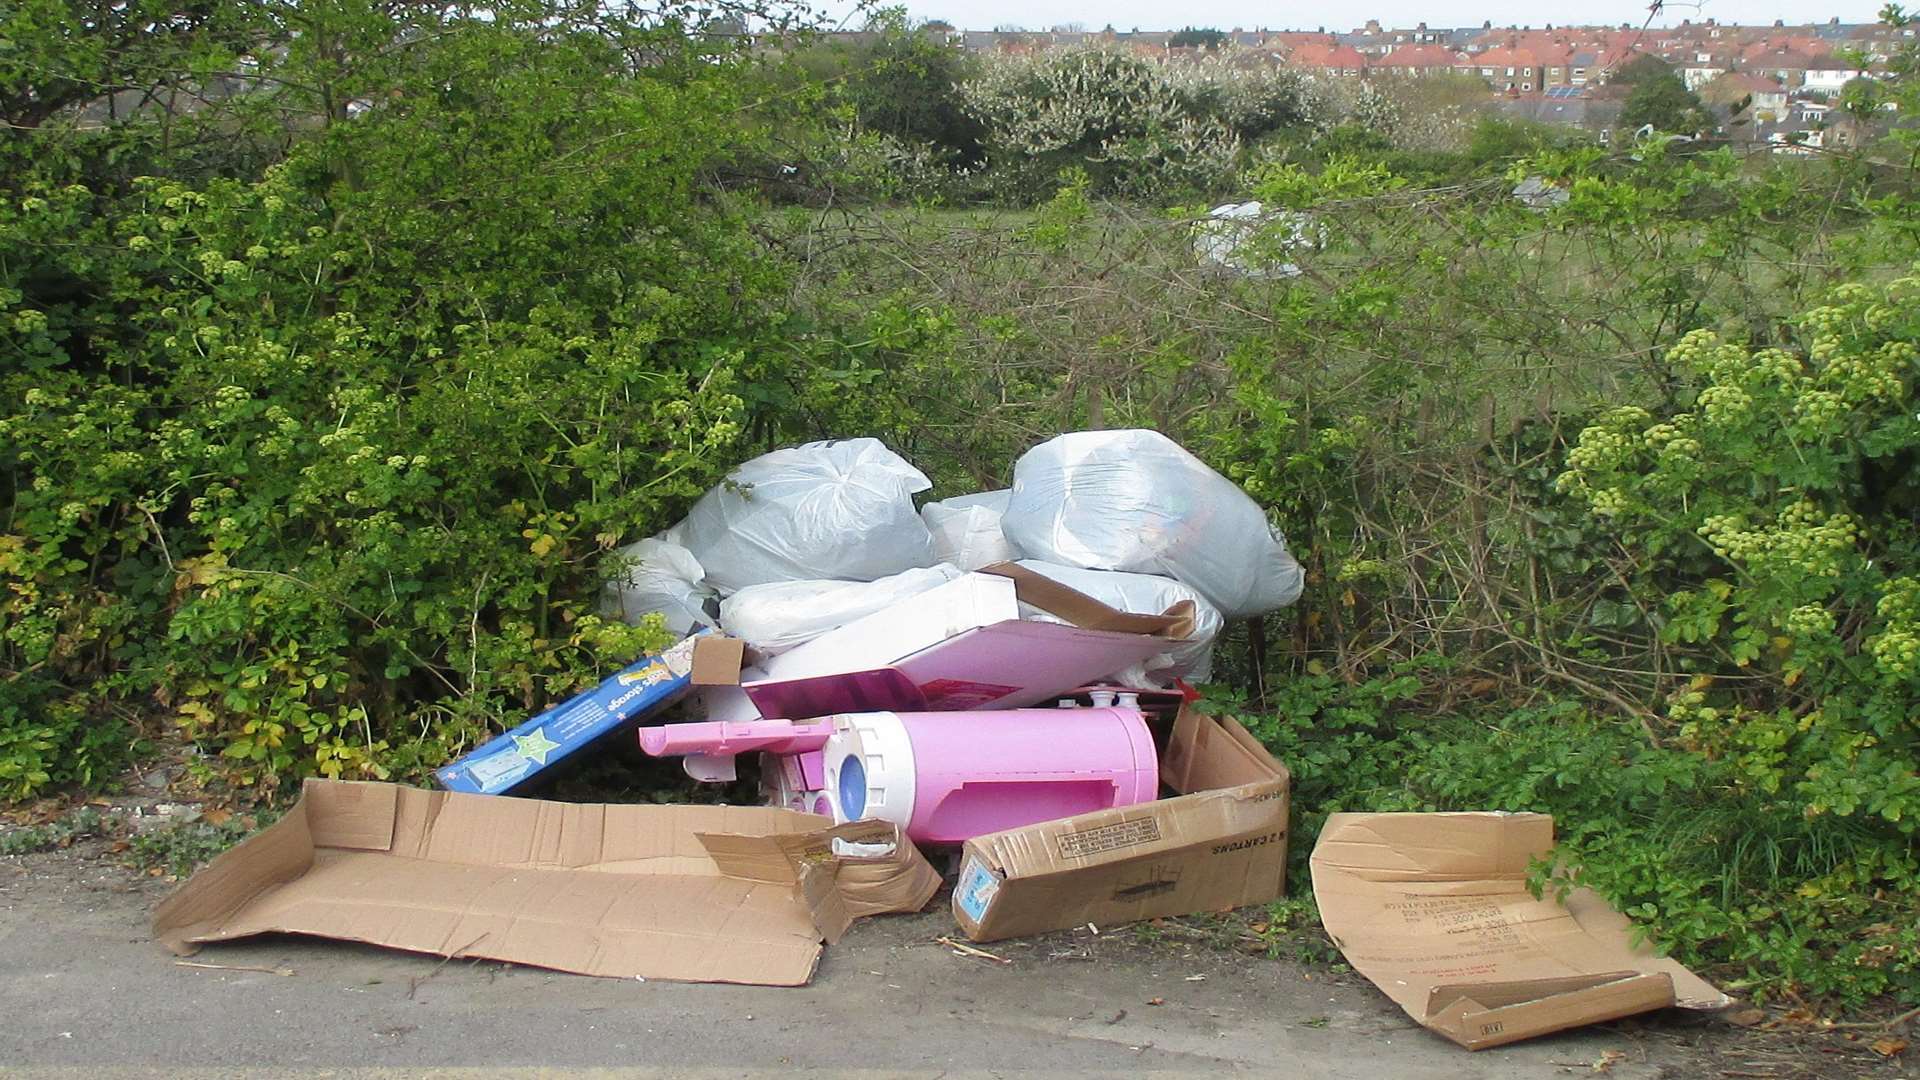 Ian Alexandra pleaded guilty to two offences of flytipping.